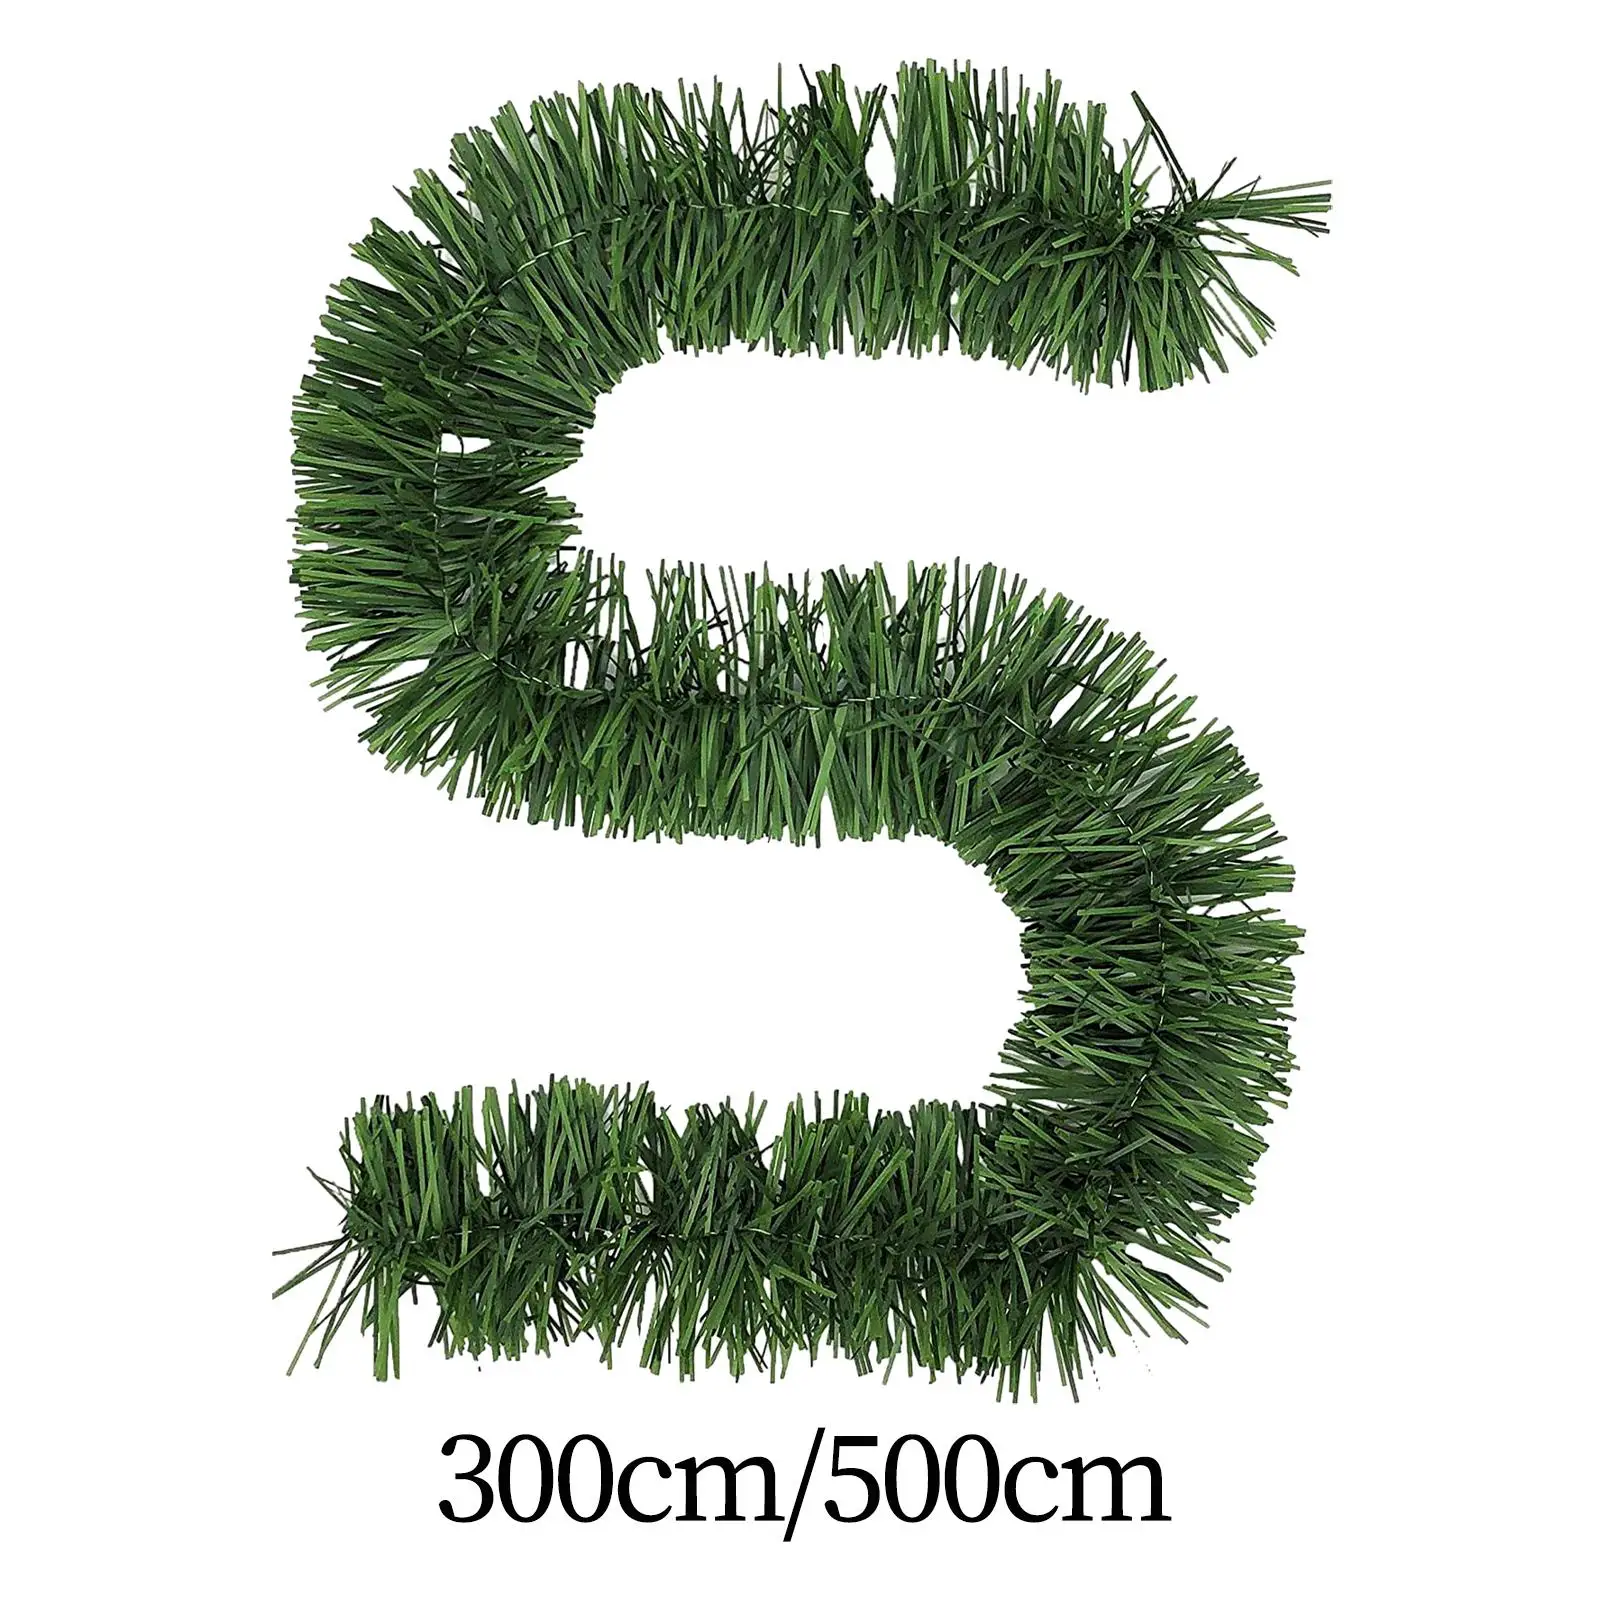 Christmas Garland Christmas Tree Decorations Hanging Ornament Home Decor Xmas Garland for Fireplace Party Wedding Mantel Stairs